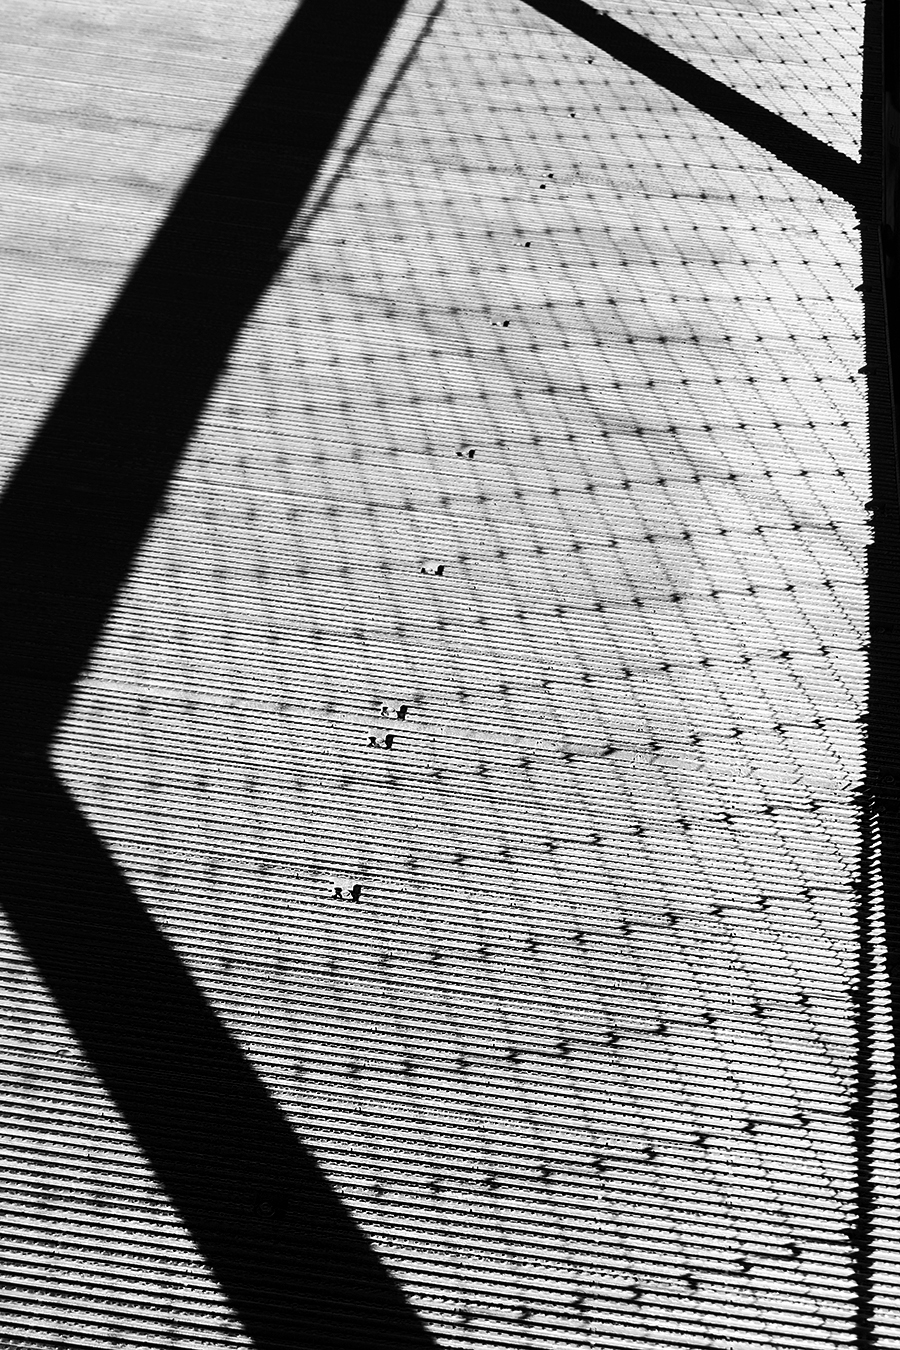 Janelle_Tong_Photography_Tony_Ward_Studio_Individual_Project_UPenn_Penn_Park_Bridges_Fence_Link_Crossing_Shadows_Black_and_White